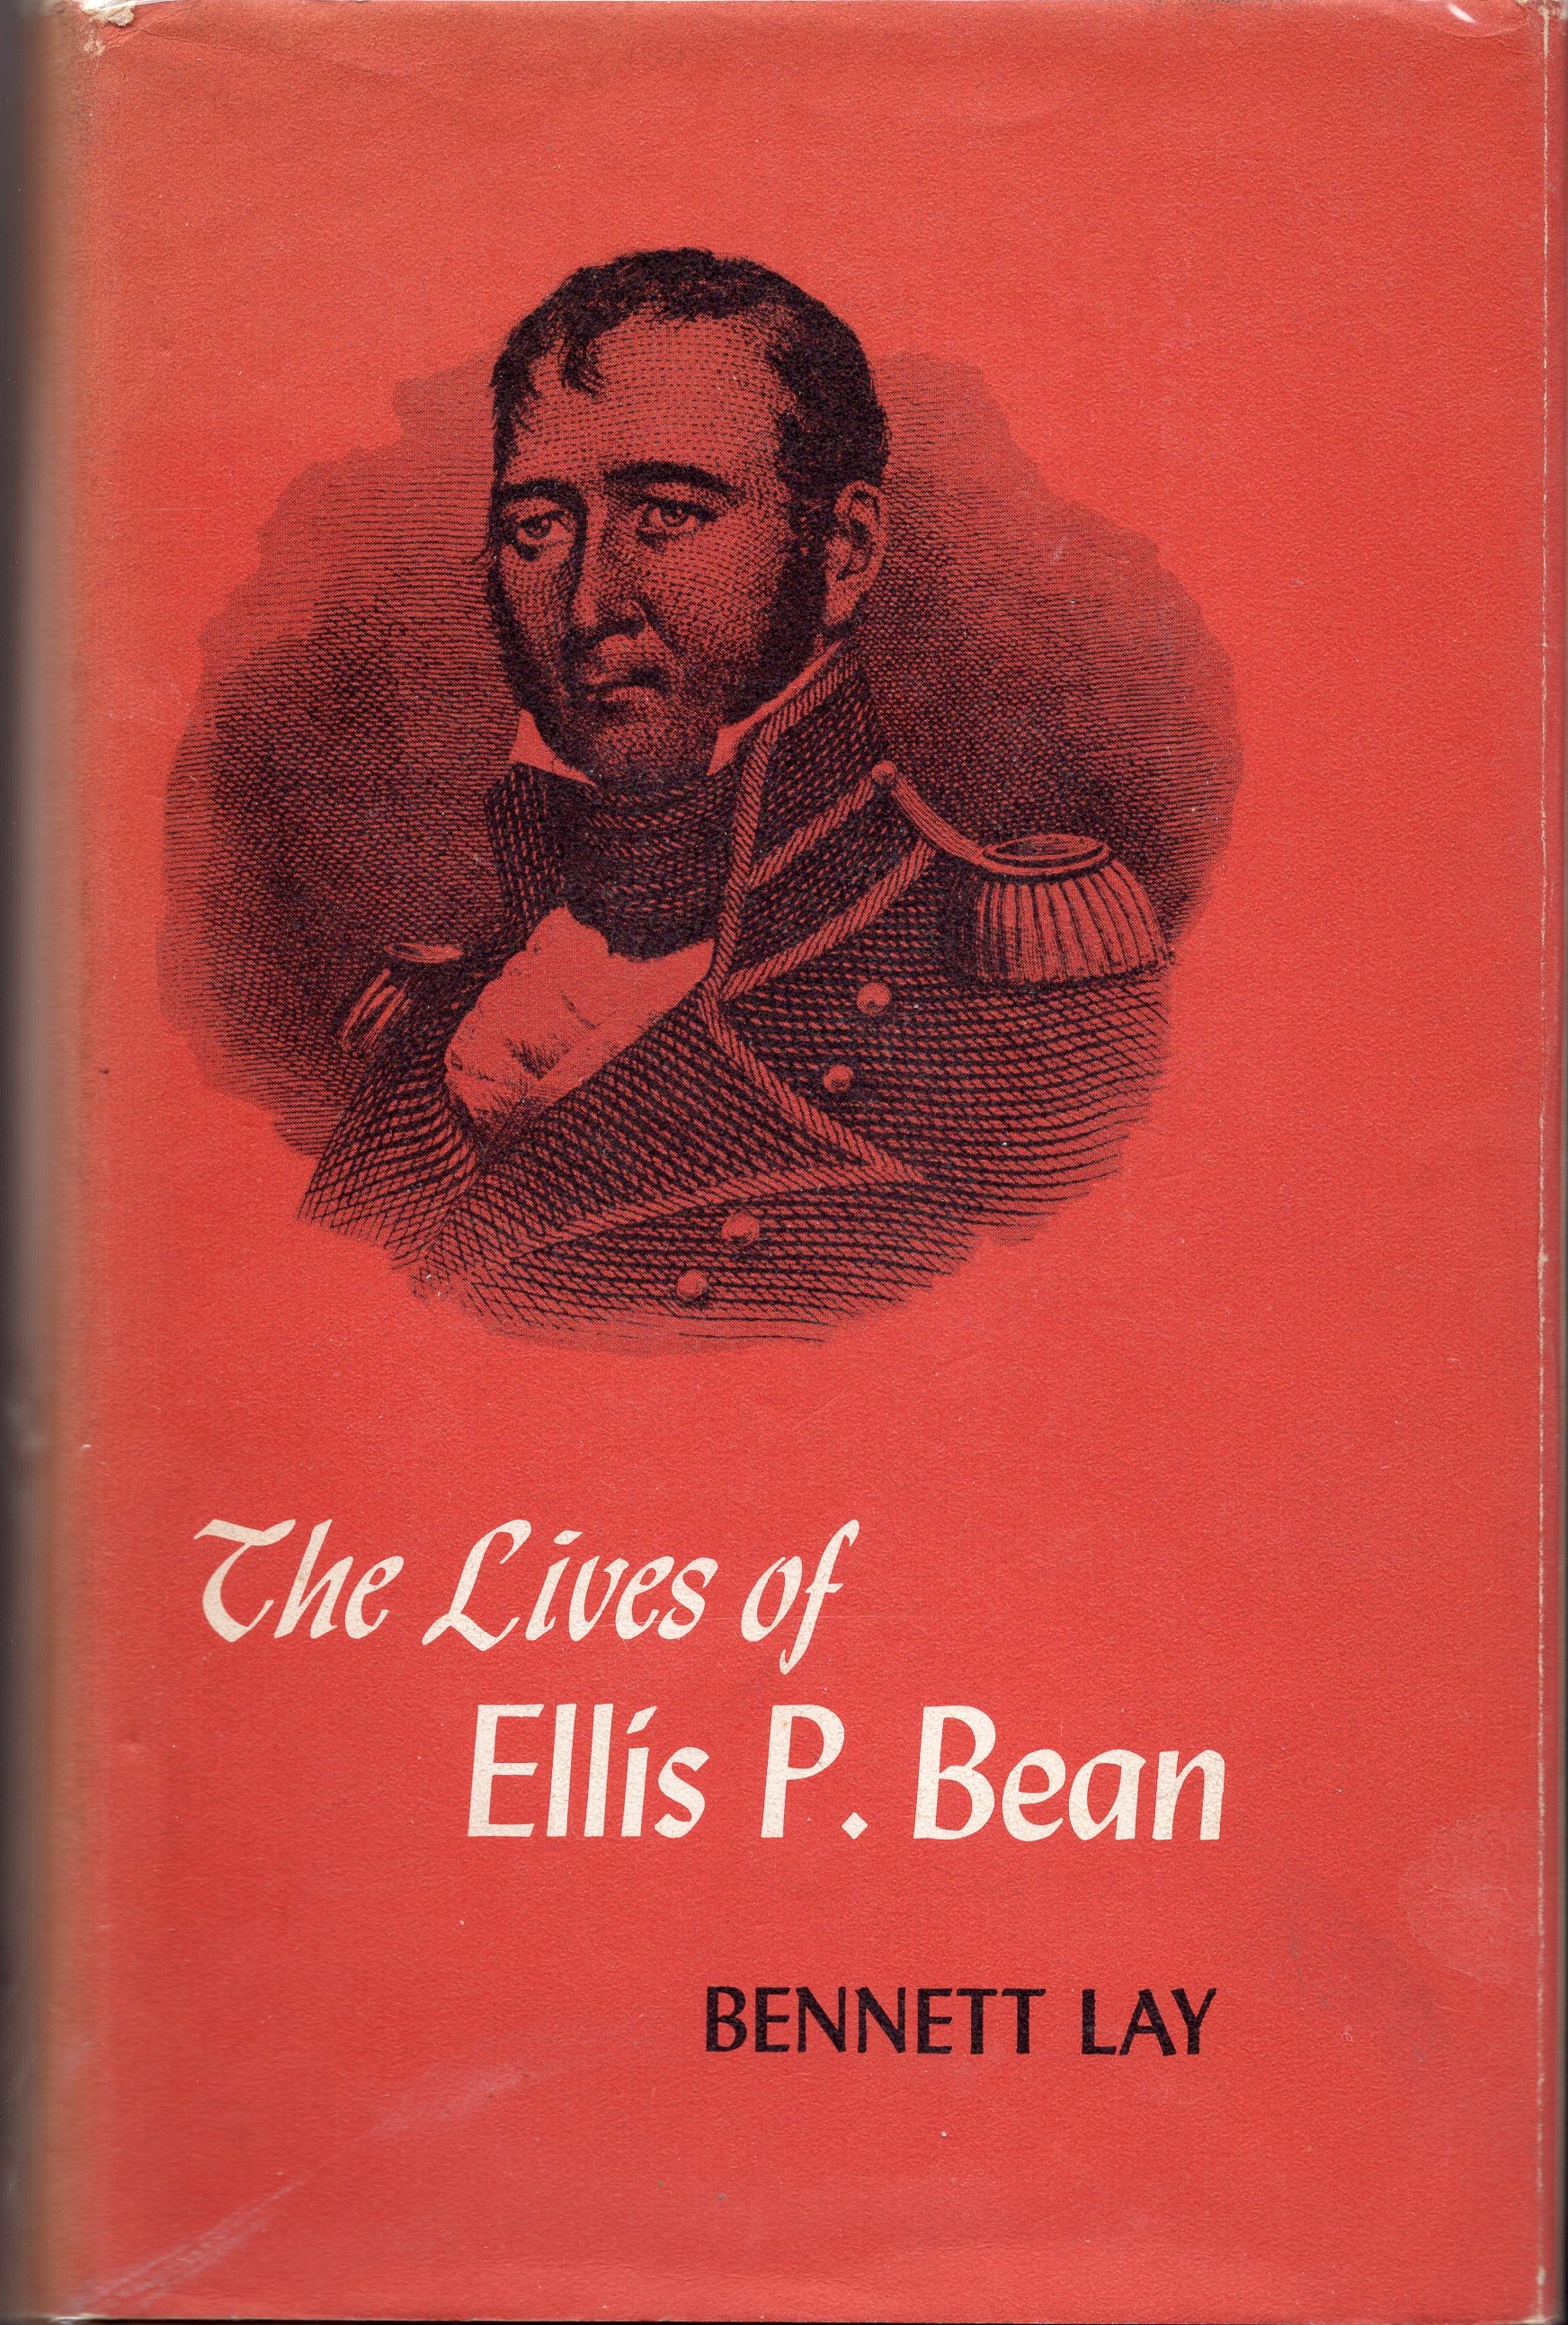 The Lives of Ellis P. Bean by Bennett Lay (1960)